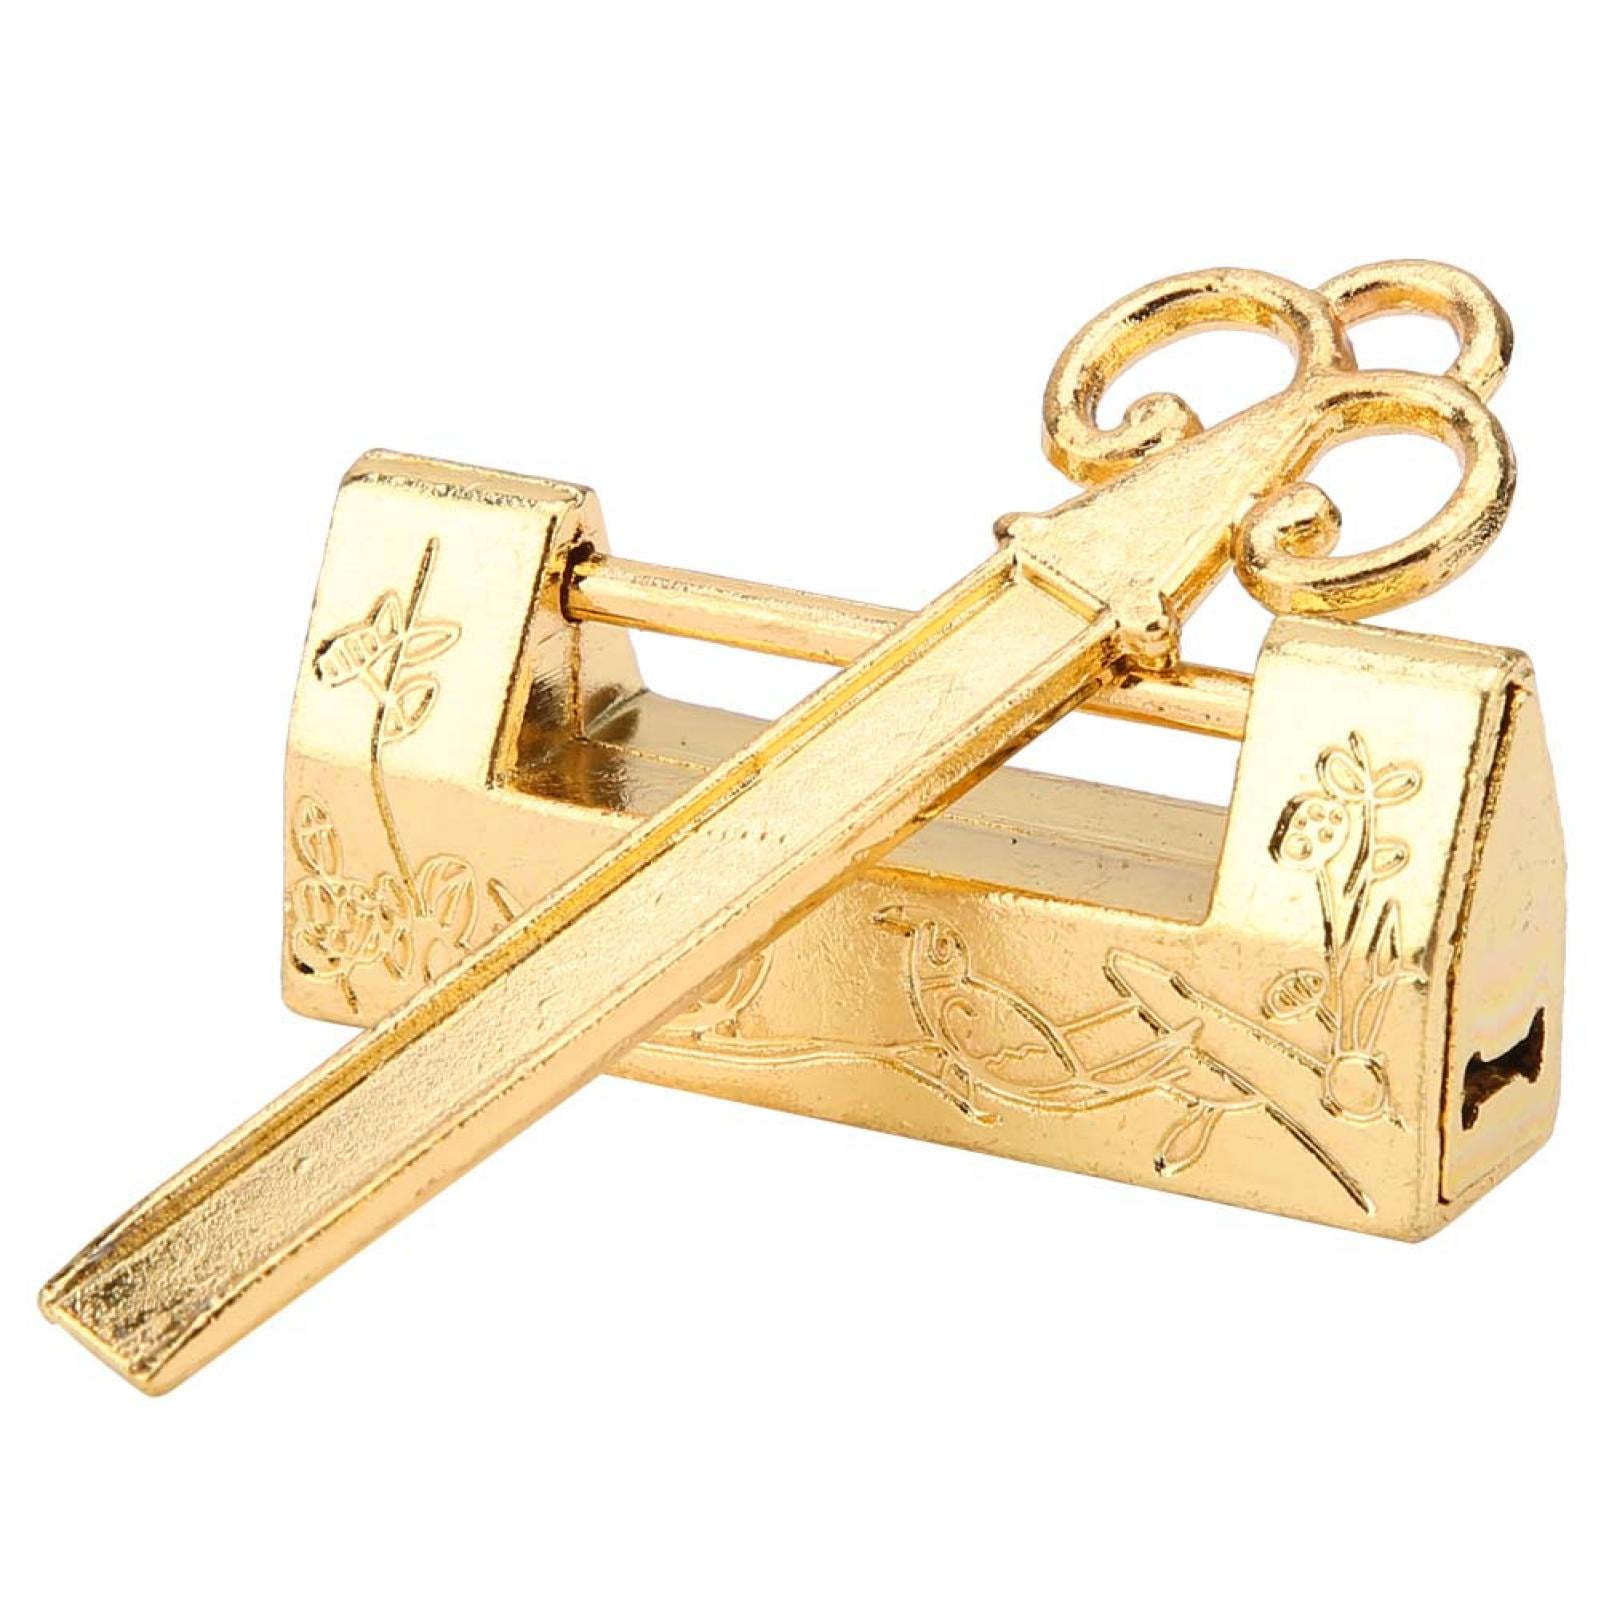 Cabinet Chinese Padlock Lock Key Decors with Magpie Carving for Travel 